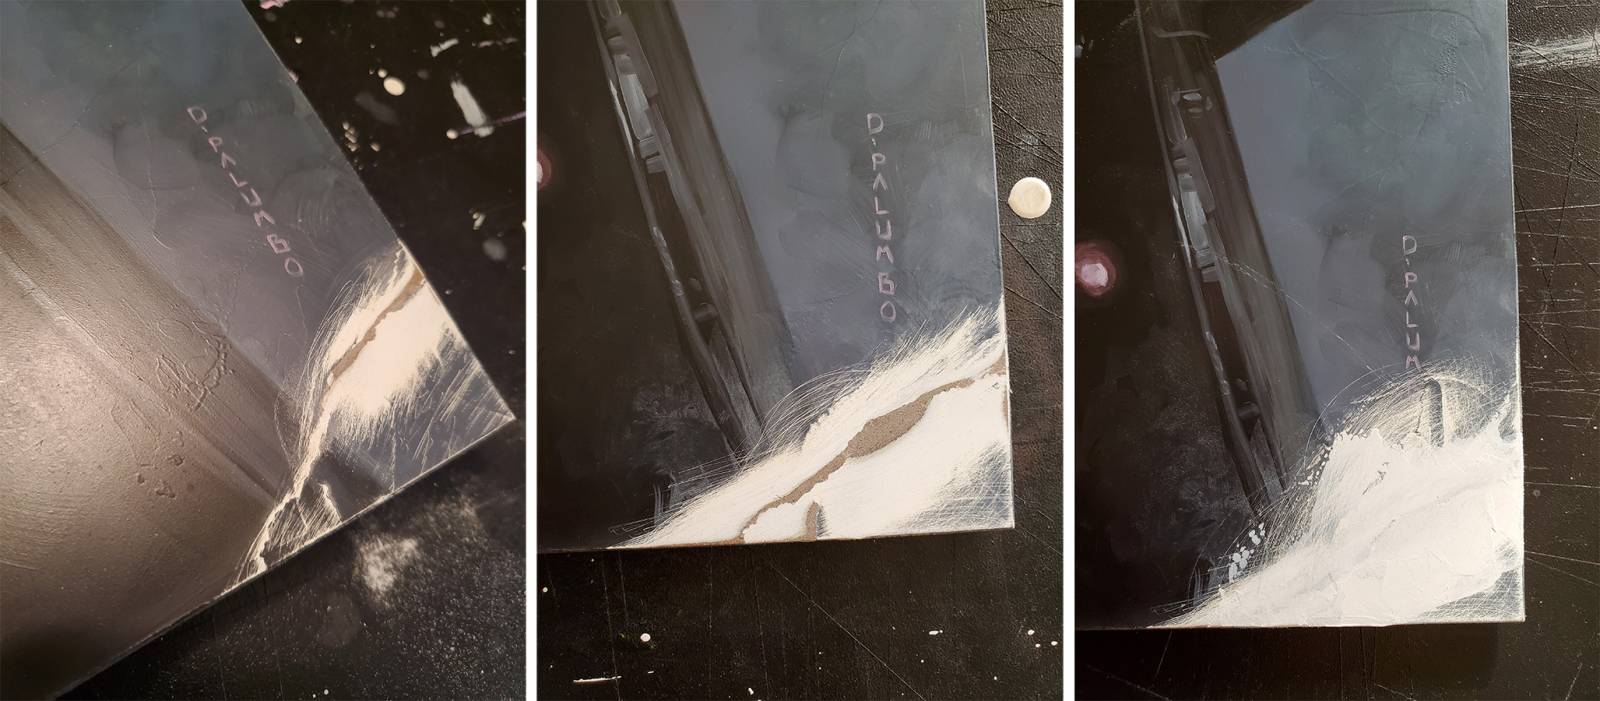 How I Fixed A Busted Painting